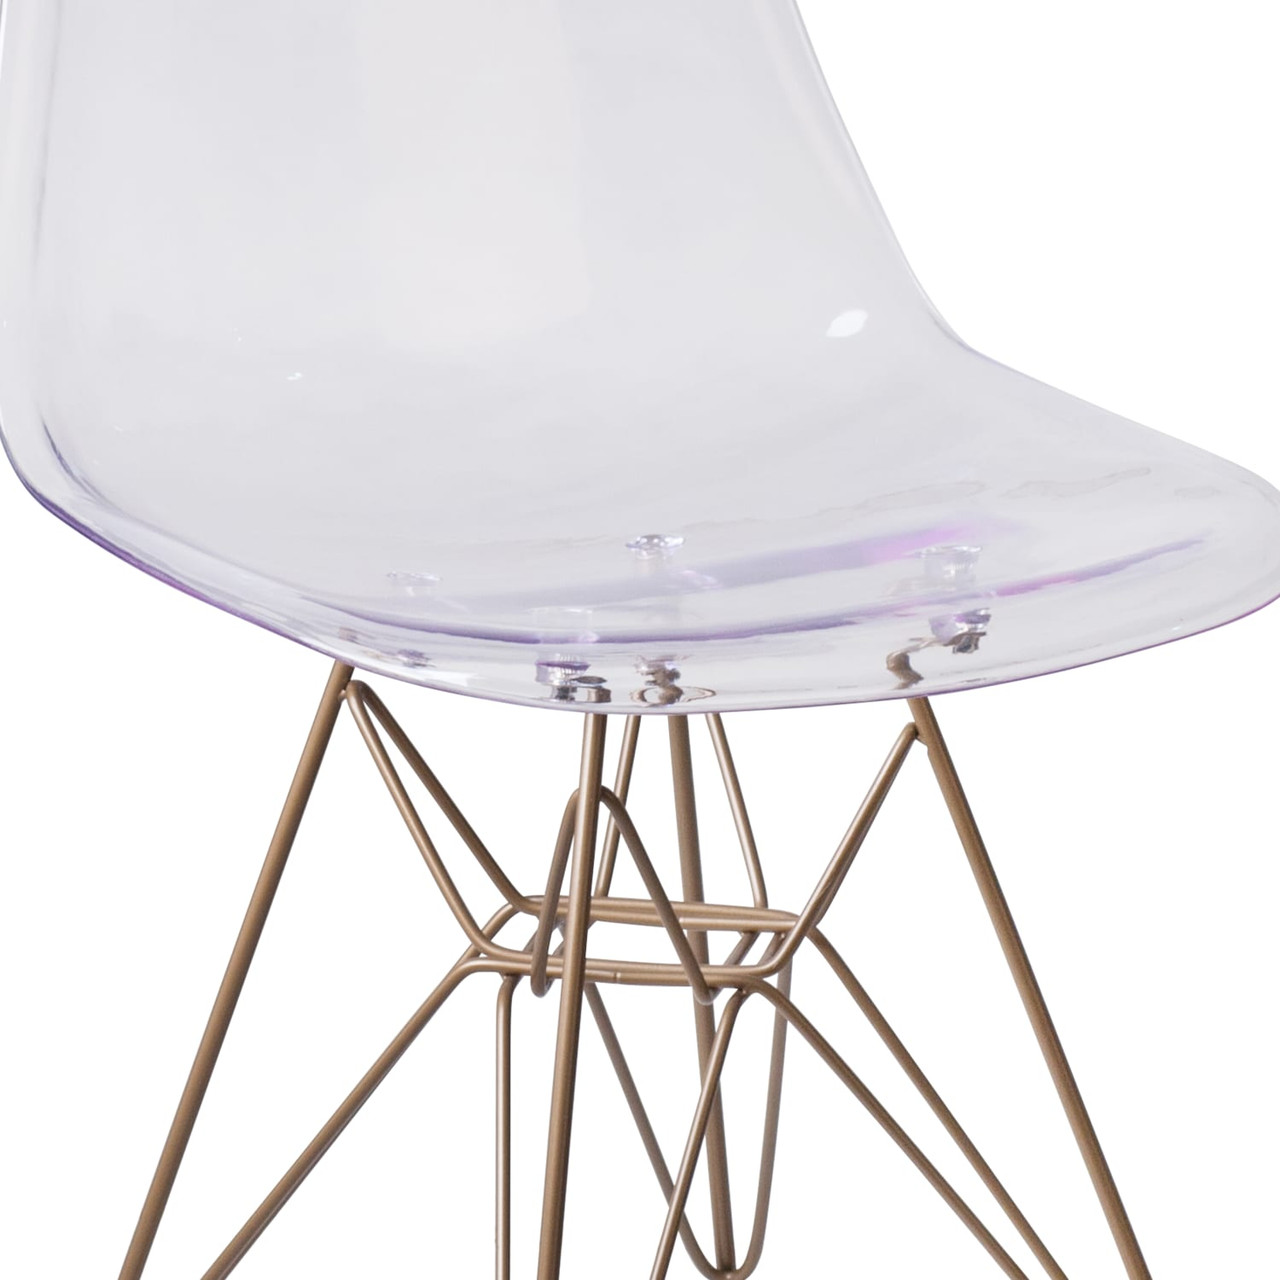 2 Pack Elon Series Ghost Chair with Gold Metal Base